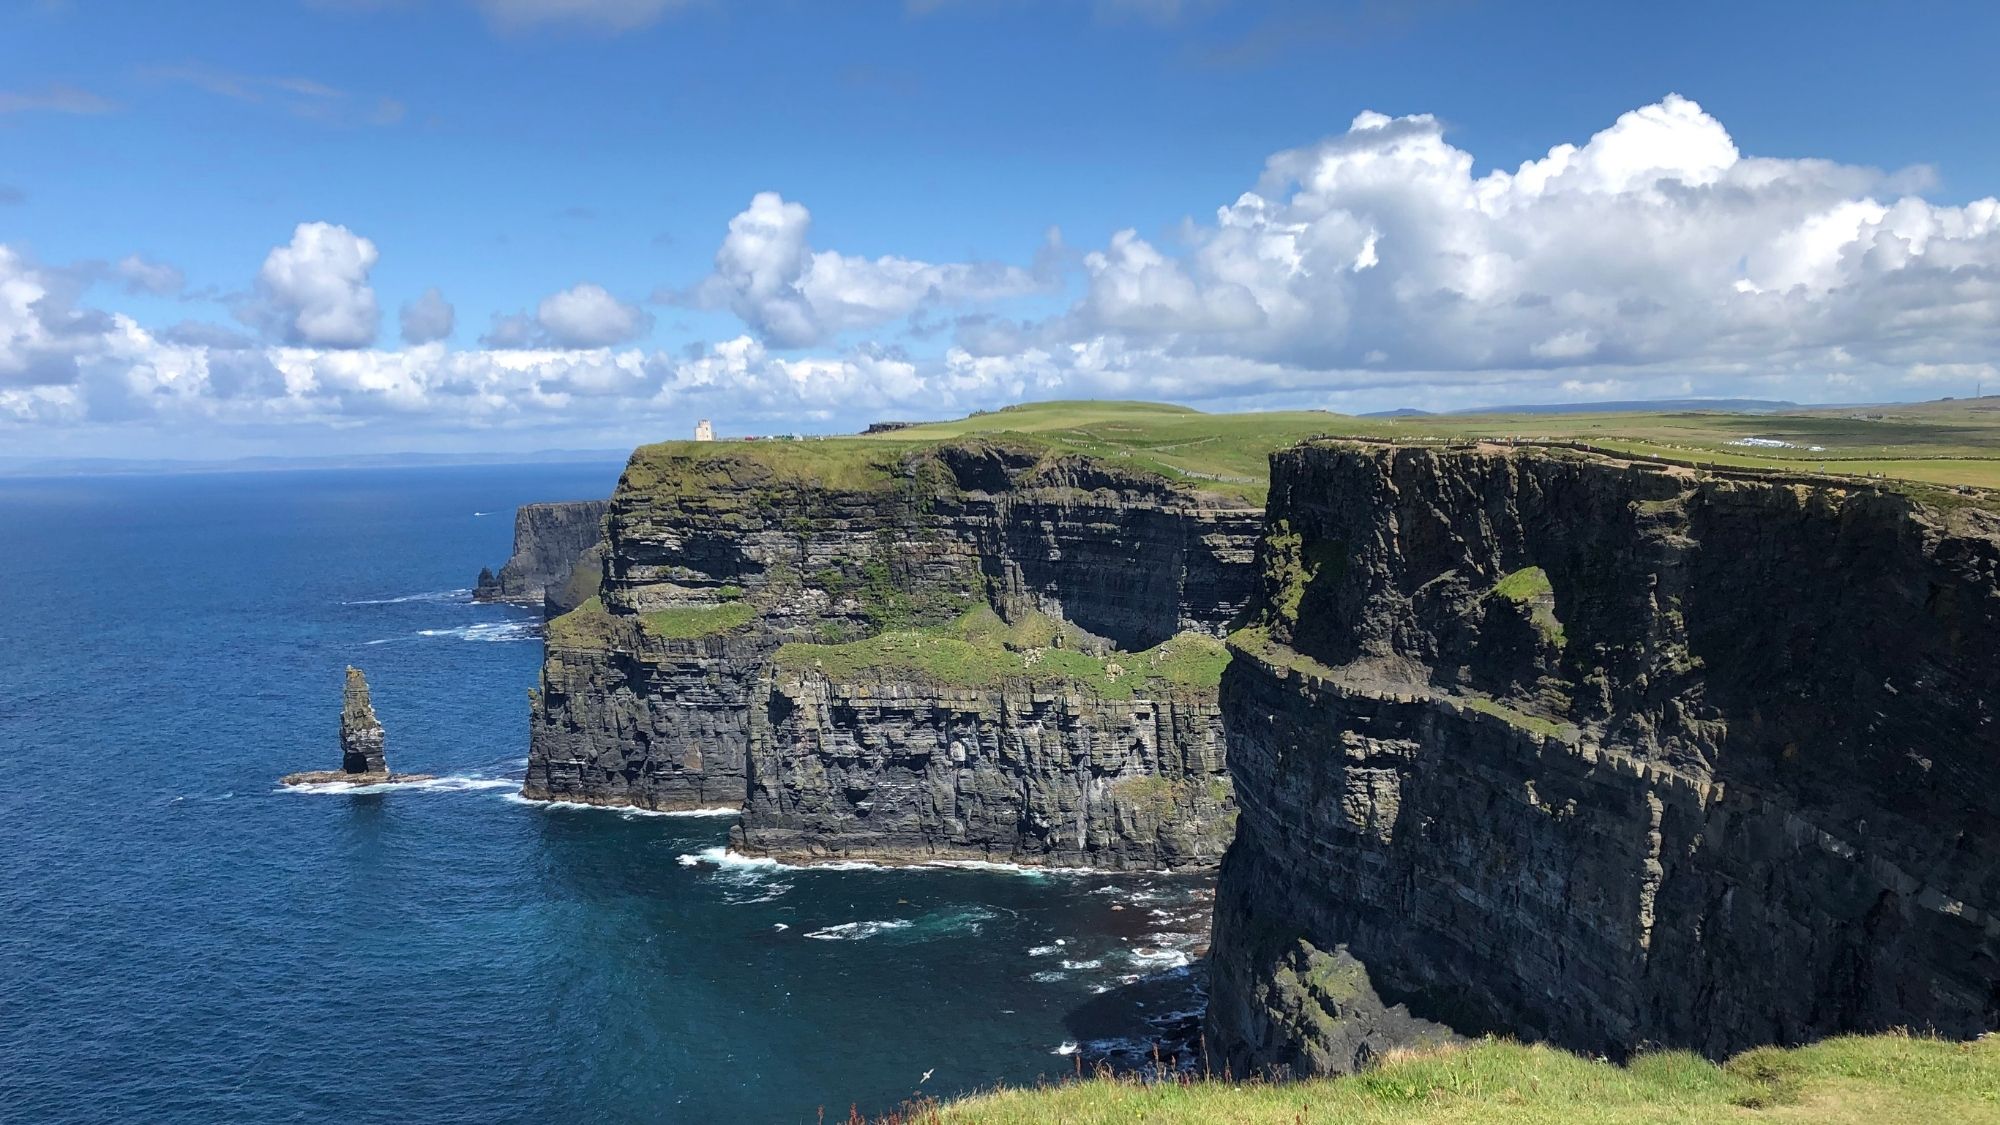 View of the Cliffs of Moher and Atlantic Ocean.